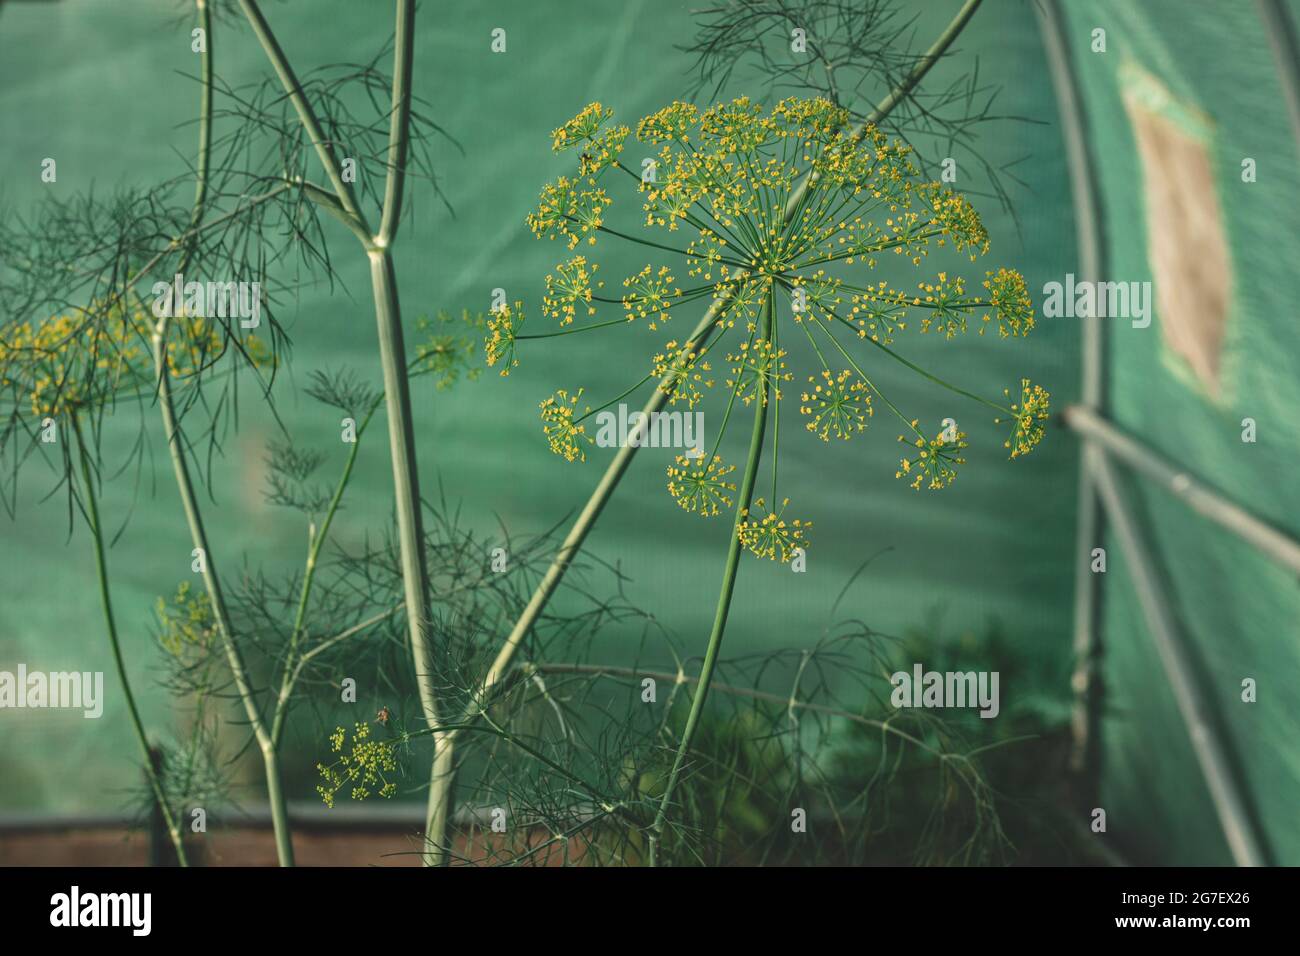 Dill (Anethum graveolens) is an annual herb in the celery family Apiaceae. It is the only species in the genus Anethum. Dill flowers, close-up Stock Photo